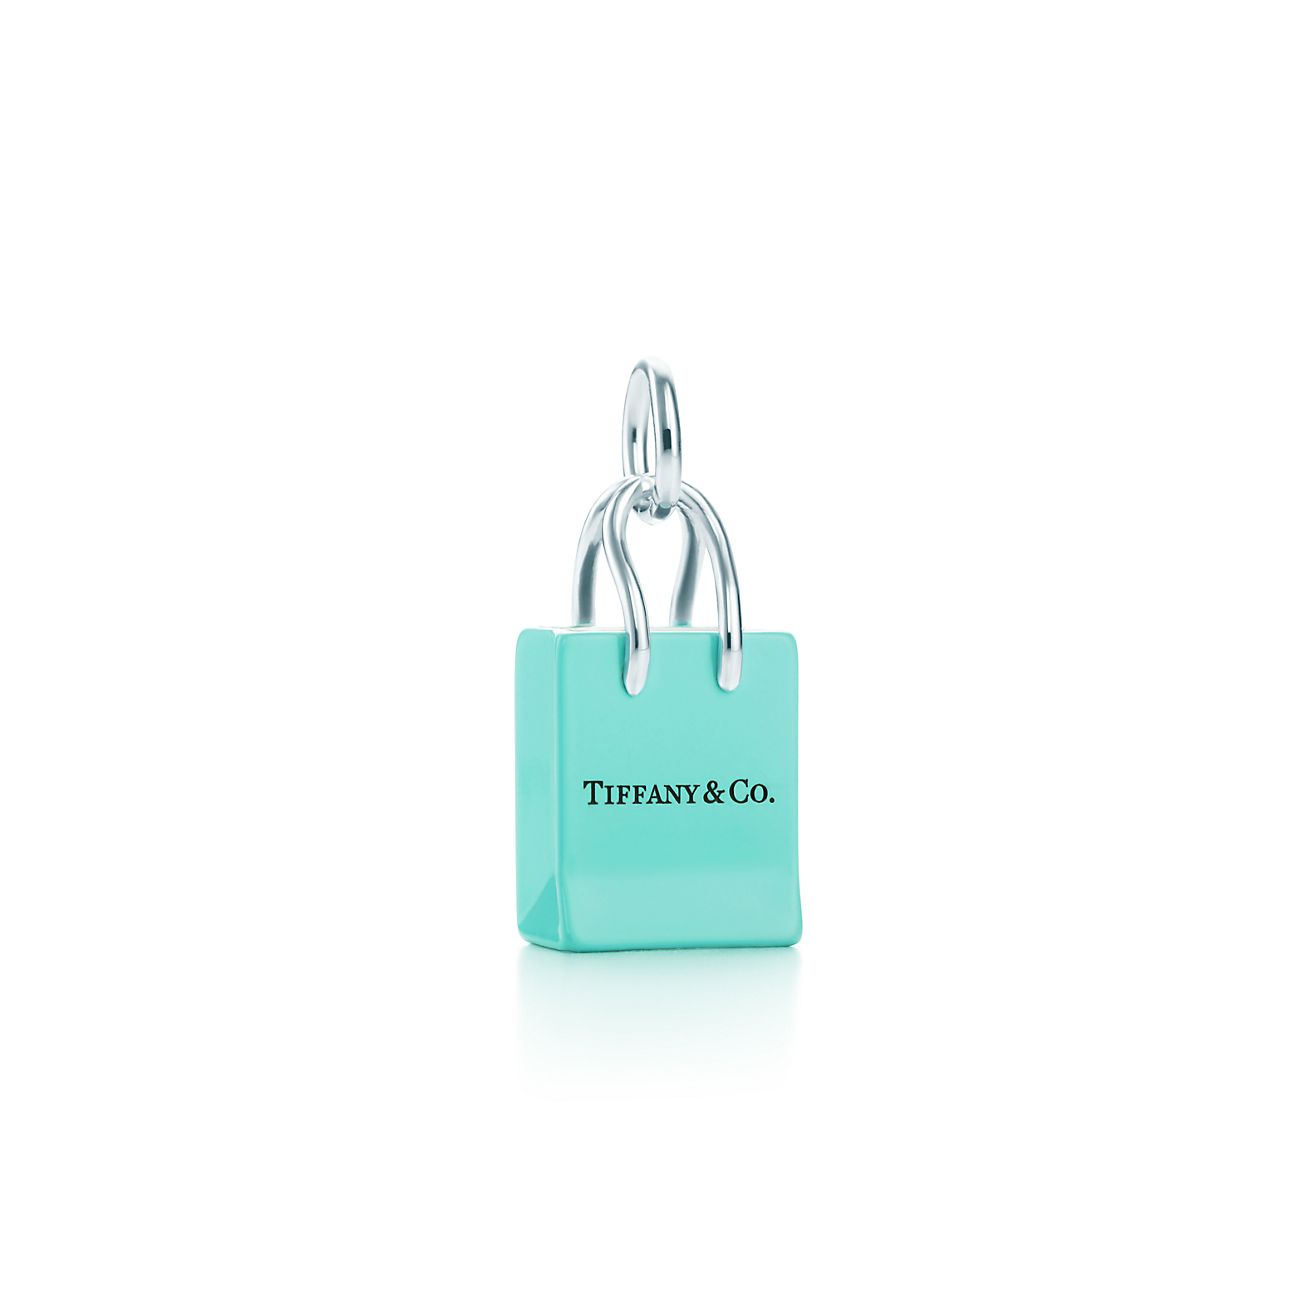 Tiffany & Co.® shopping bag charm in sterling silver with enamel ...